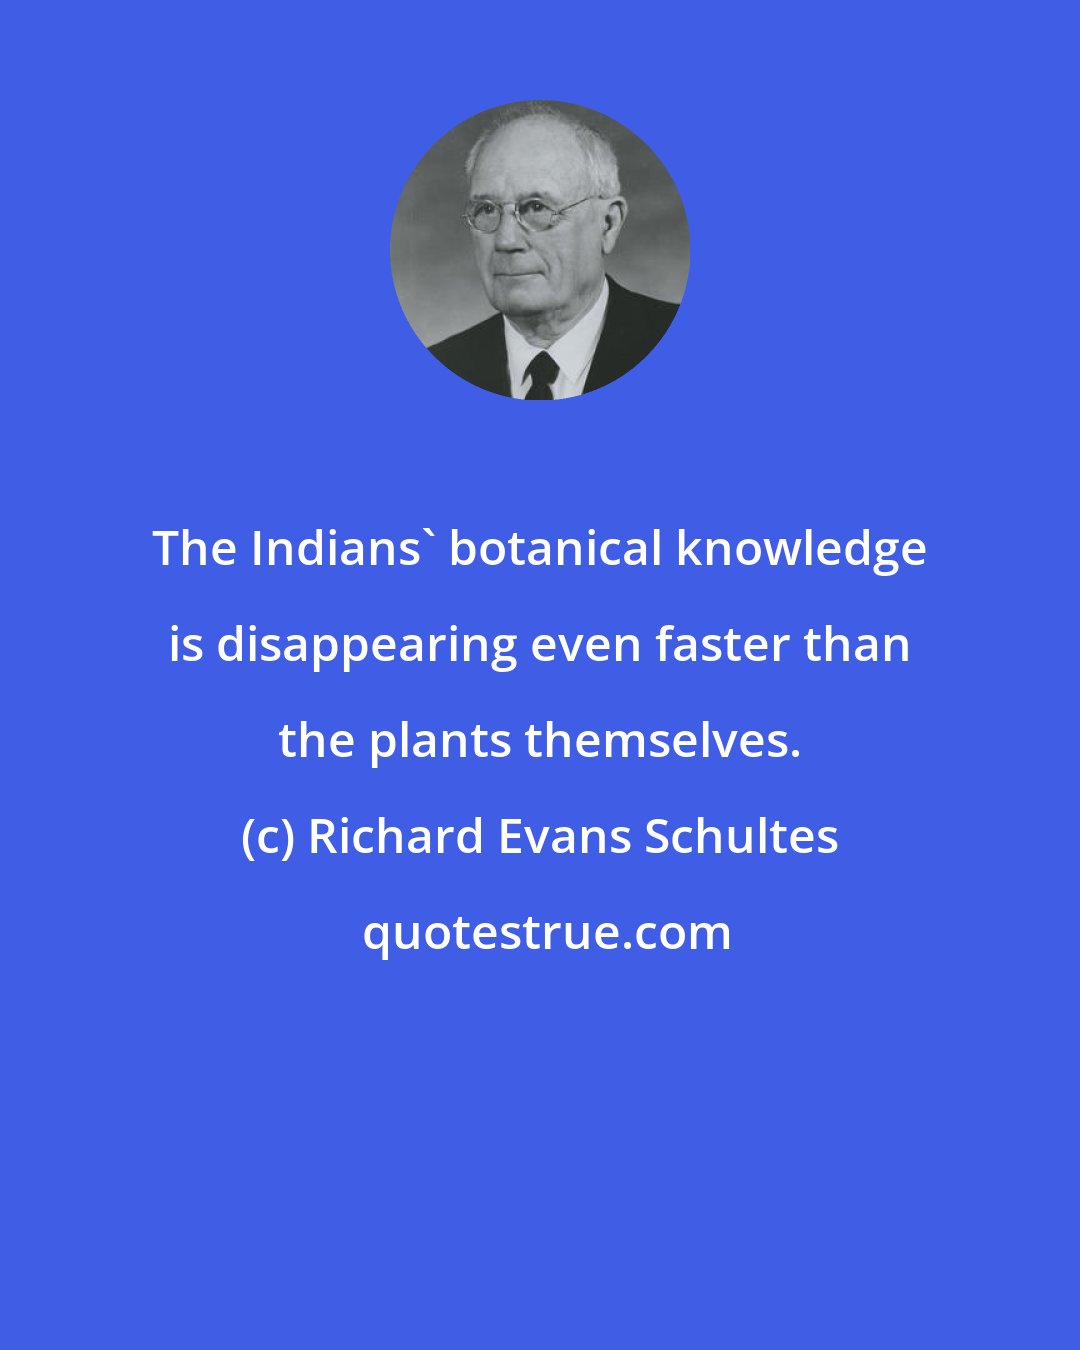 Richard Evans Schultes: The Indians' botanical knowledge is disappearing even faster than the plants themselves.